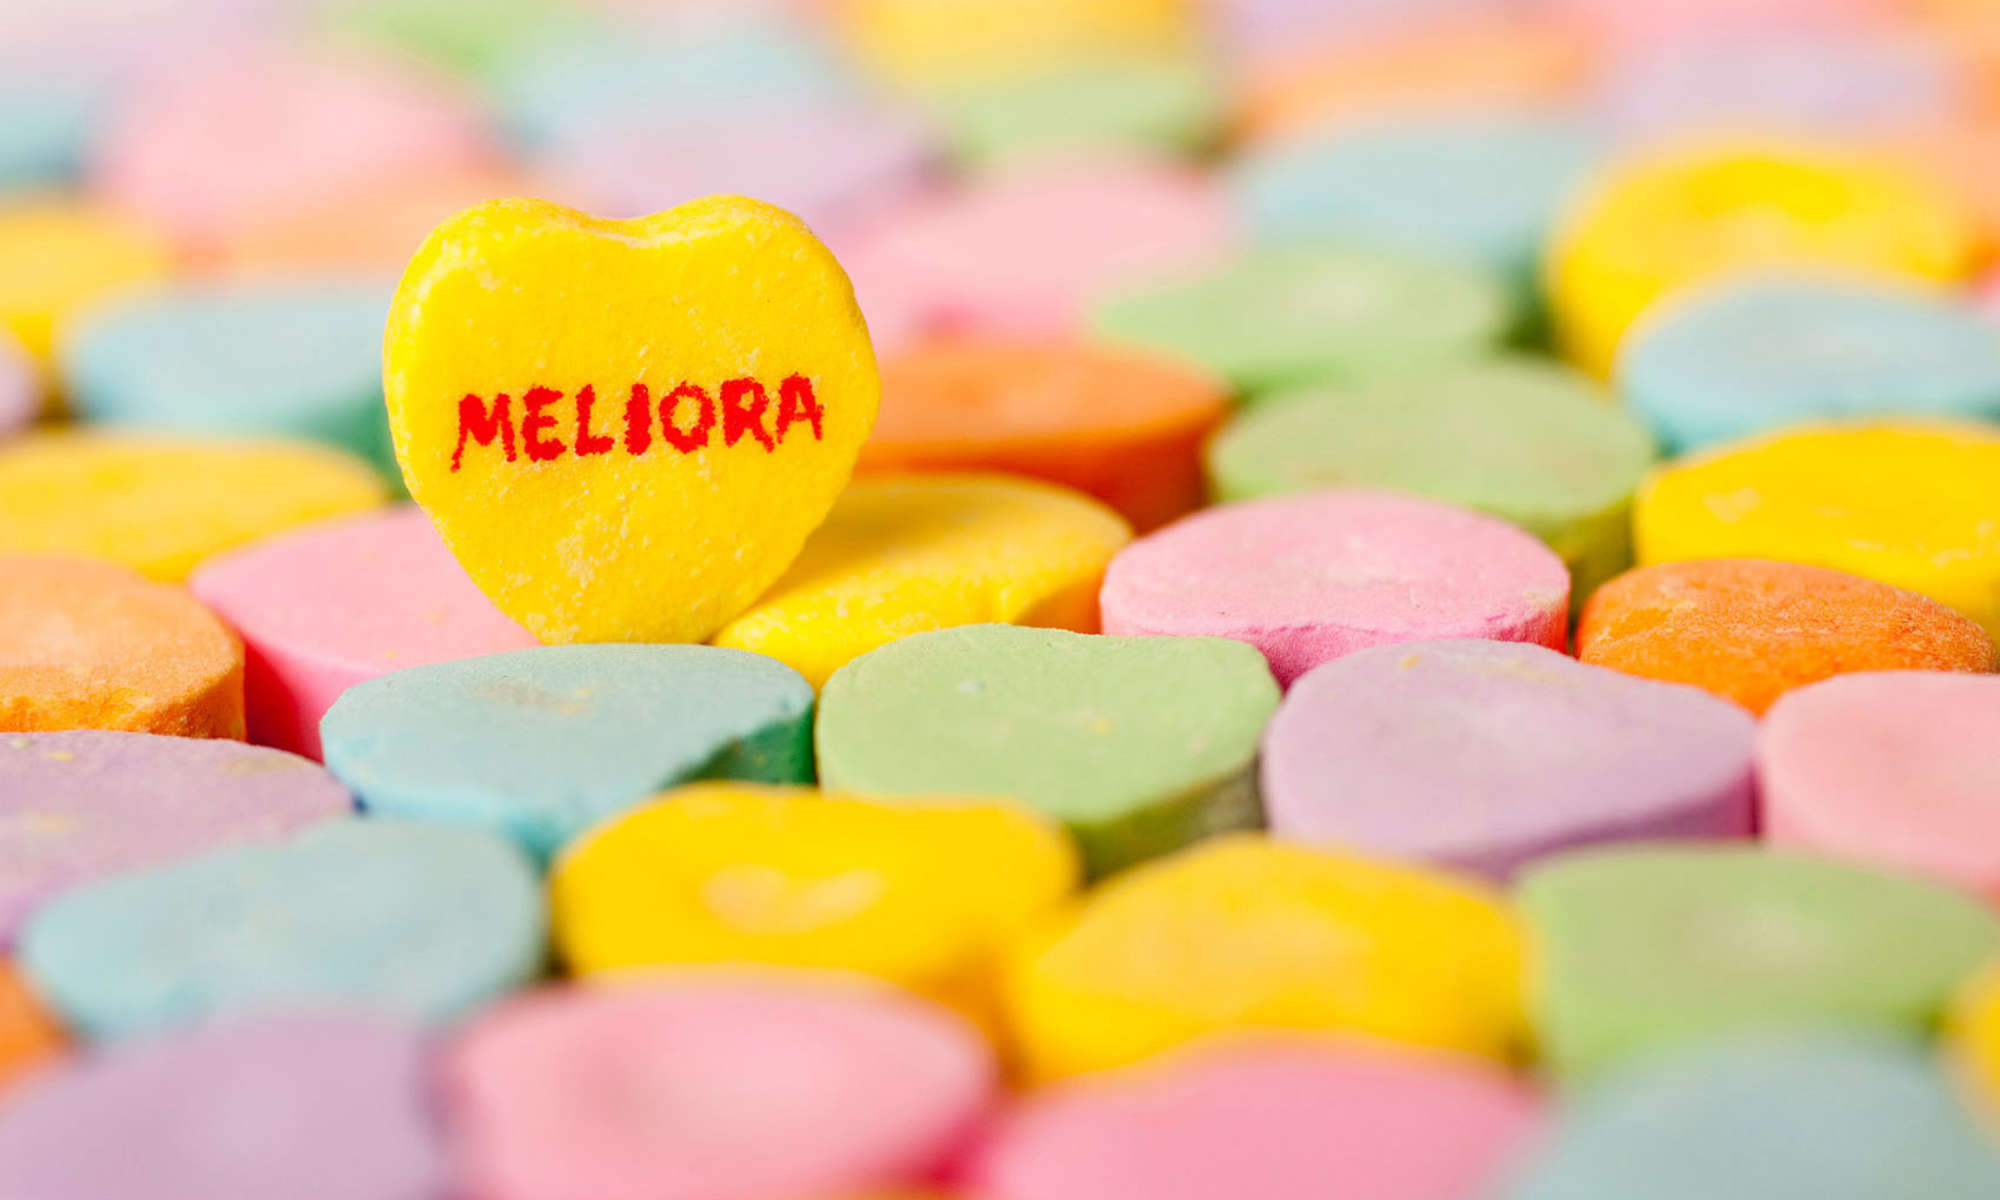 Candy hearts laid flat but a yellow one with "Meliora" written on it is upright.